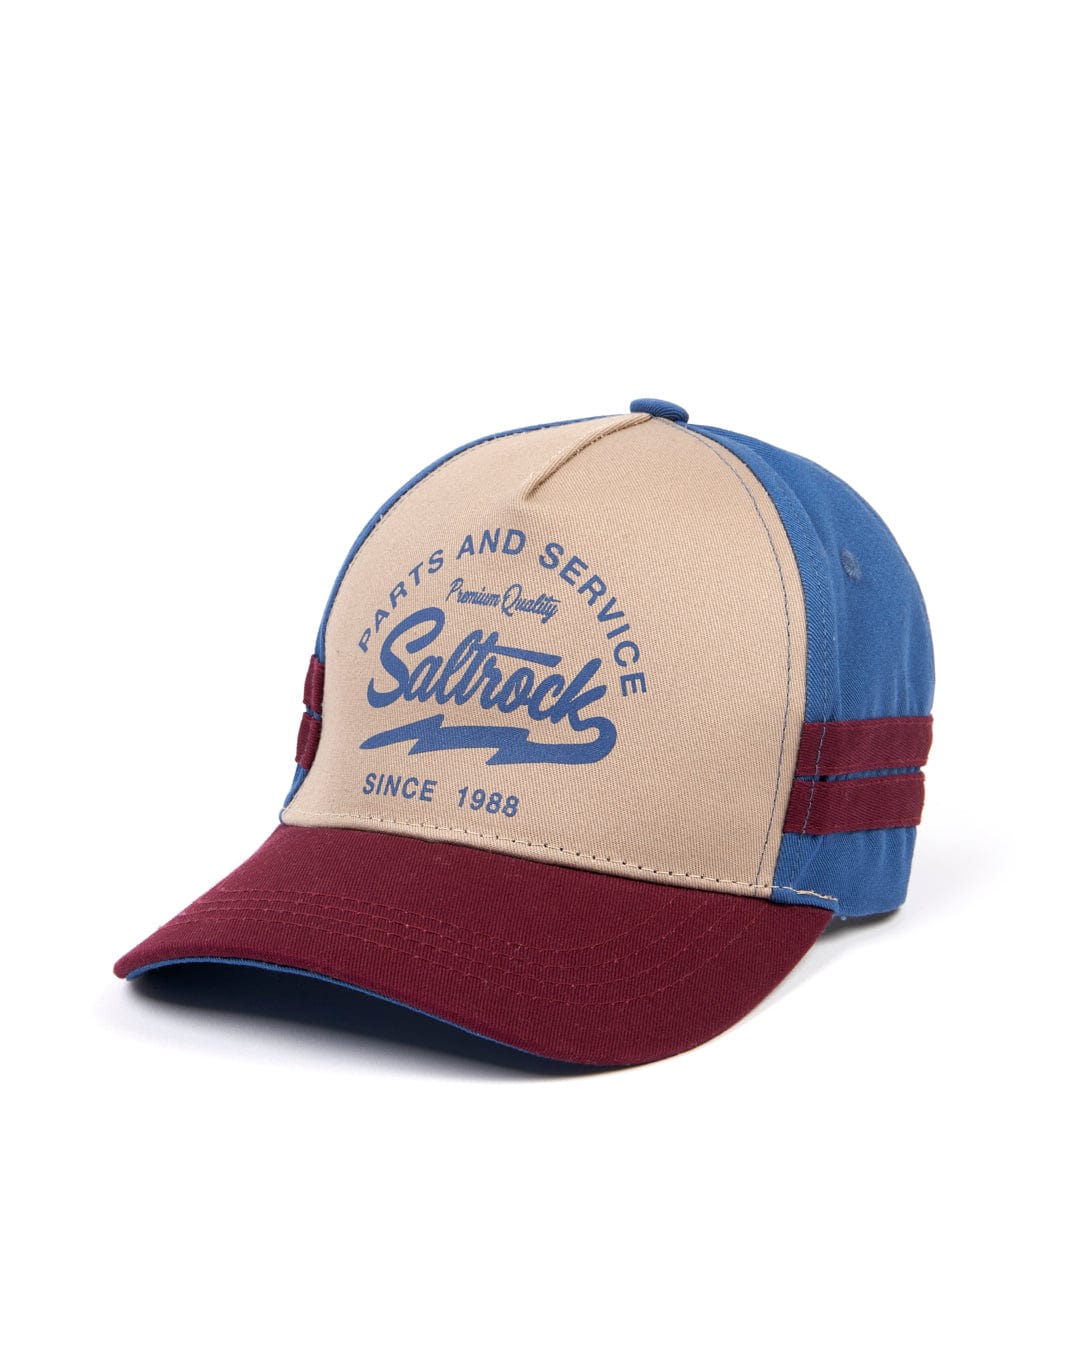 A Strike cap in Blue/Burgundy with the words "life" and "service" on it, featuring an adjustable strap for a custom fit by Saltrock.